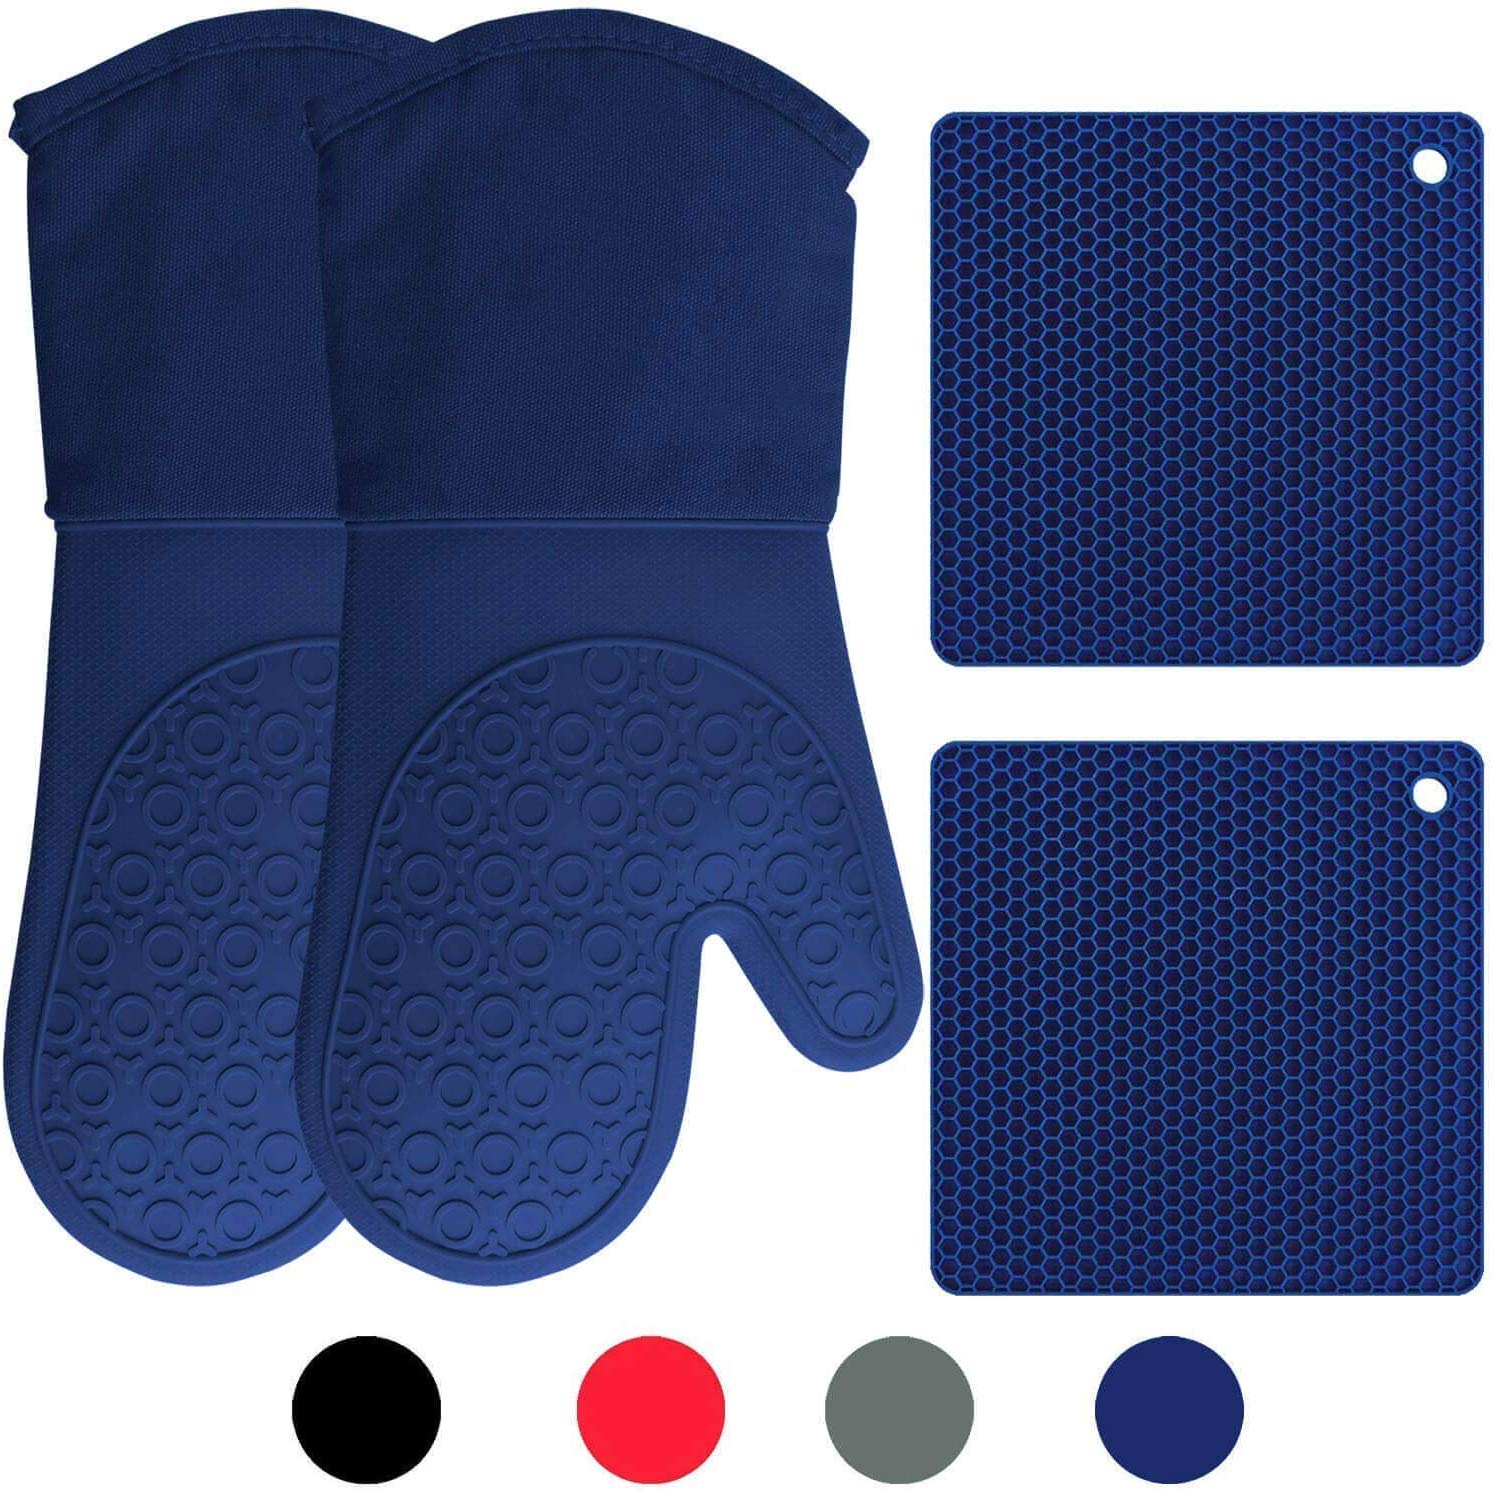 Gorilla Grip Heat and Slip Resistant 4 Piece Silicone Oven Mitt and Trivets  Set, Waterproof, Cotton Lined Gloves, BPA-Free, Long Cooking Mitts and